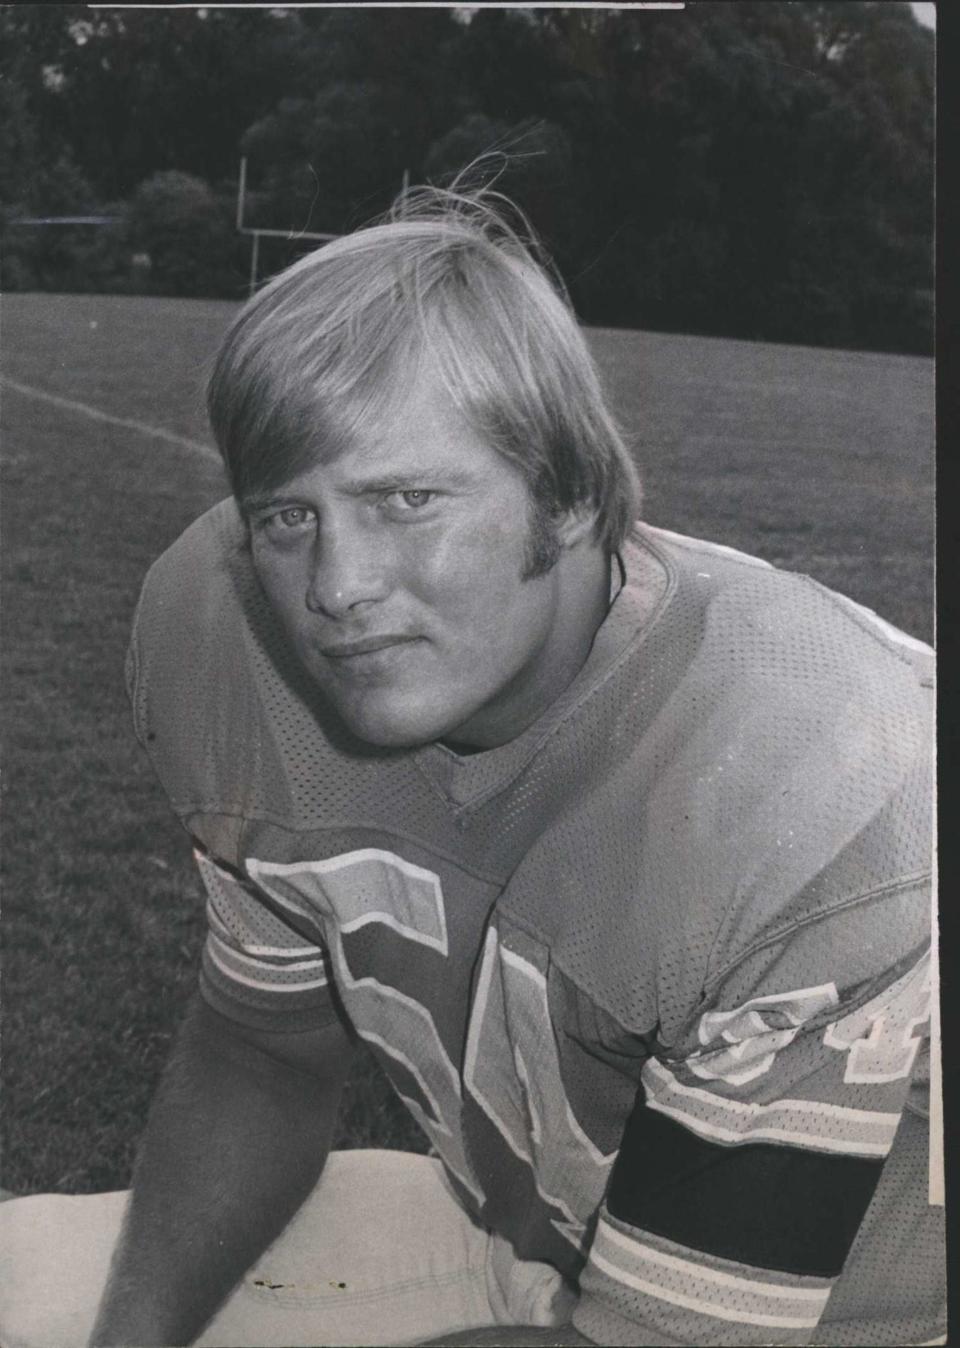 Detroit Lions center Ed Flanagan was a four-time Pro Bowler who appeared in 139 games (all starts) for the Lions from 1965-74. He was a fifth-round pick out of Purdue.